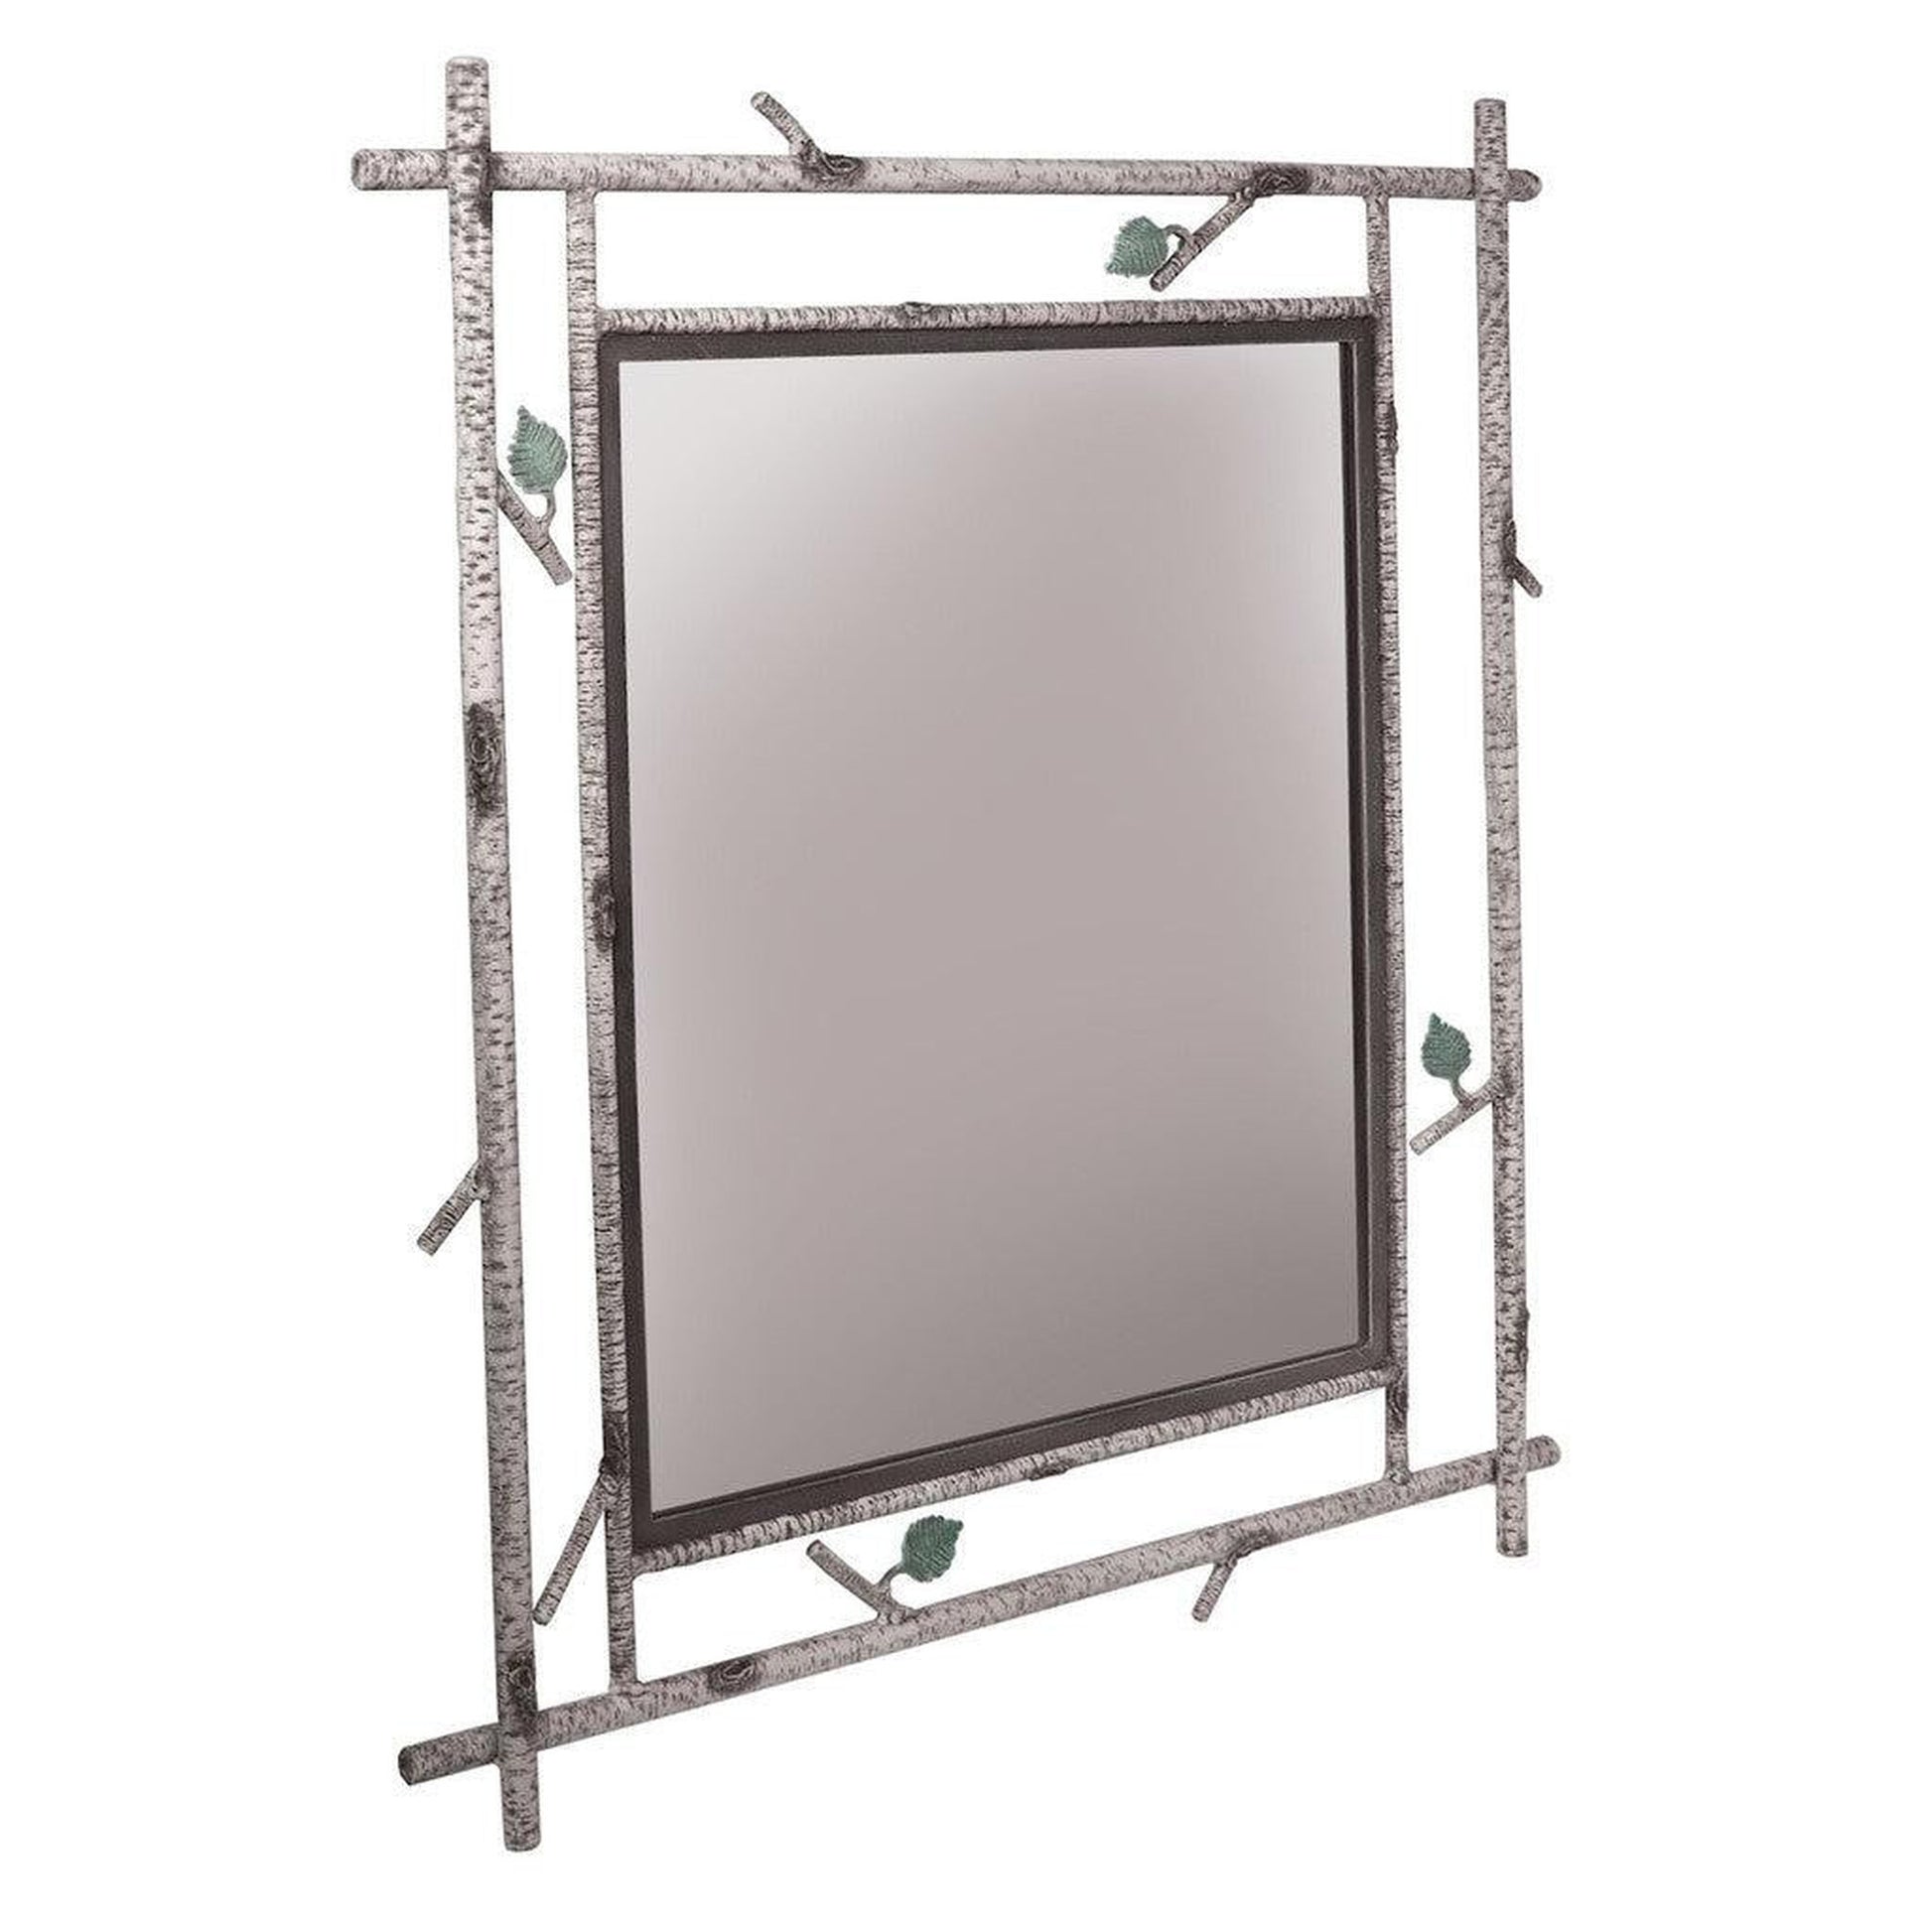 Stone County Ironworks Whisper Creek 35" x 47" Large Woodland Brown Iron Wall Mirror With Gold Iron Accent